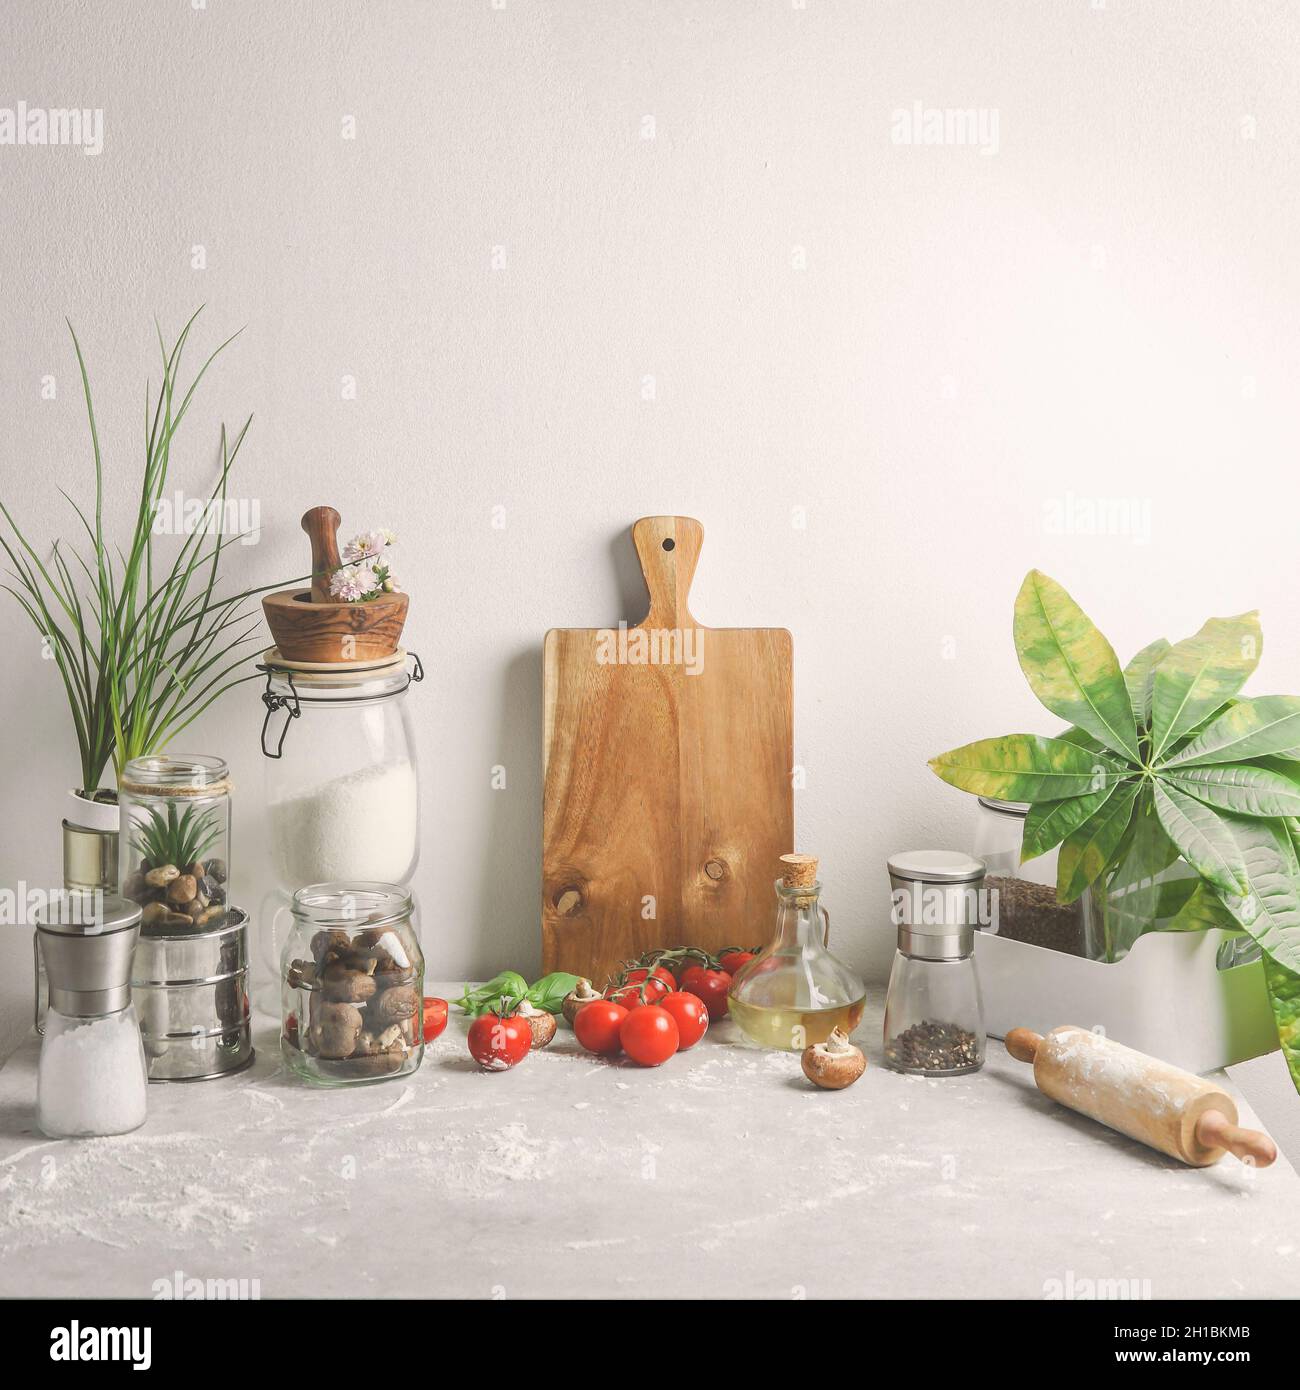 Waste-free domestic kitchen still life background with glass jars, wooden cutting board, plants, glass utensils, mortar and pestle on pale grey table Stock Photo